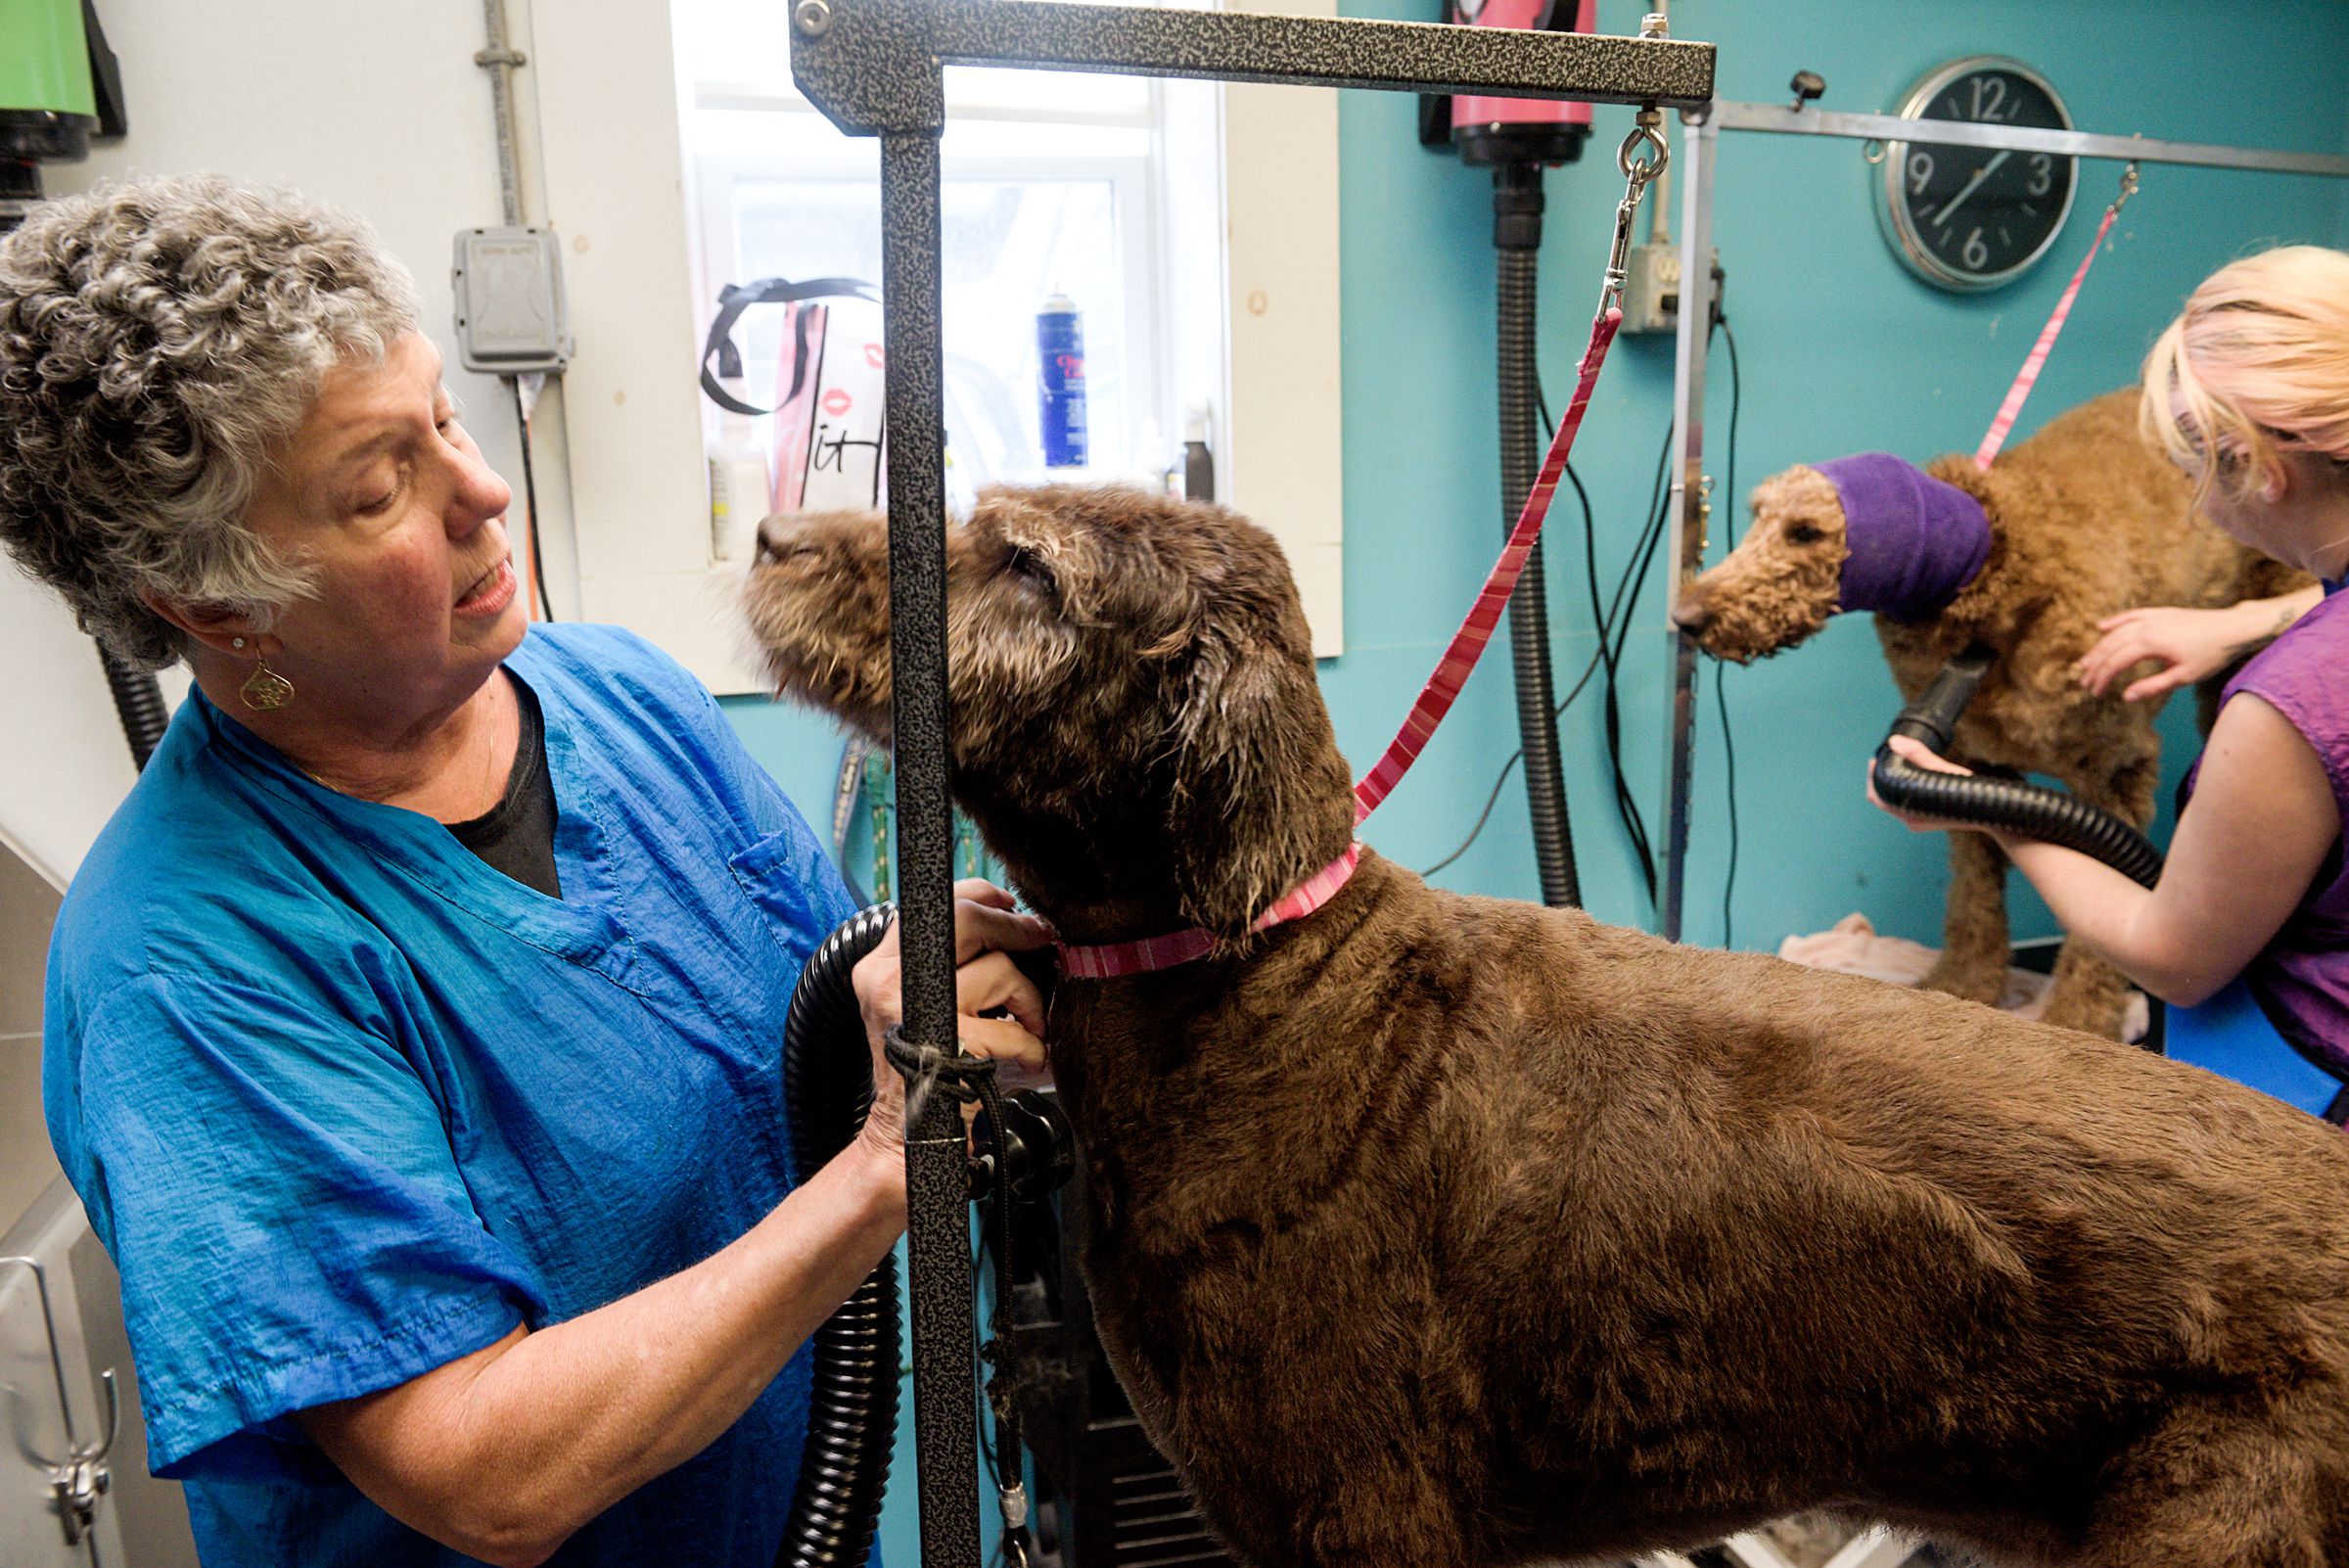 Groomers Jodi Garside, left, and Jess Michelotti, right, blow-dry Doodles Fenzer, left, and Teddy, right, at Unleashed in New London, N.H., Wednesday, Sept. 25, 2019. (Valley News - James M. Patterson) Copyright Valley News. May not be reprinted or used online without permission. Send requests to permission@vnews.com.